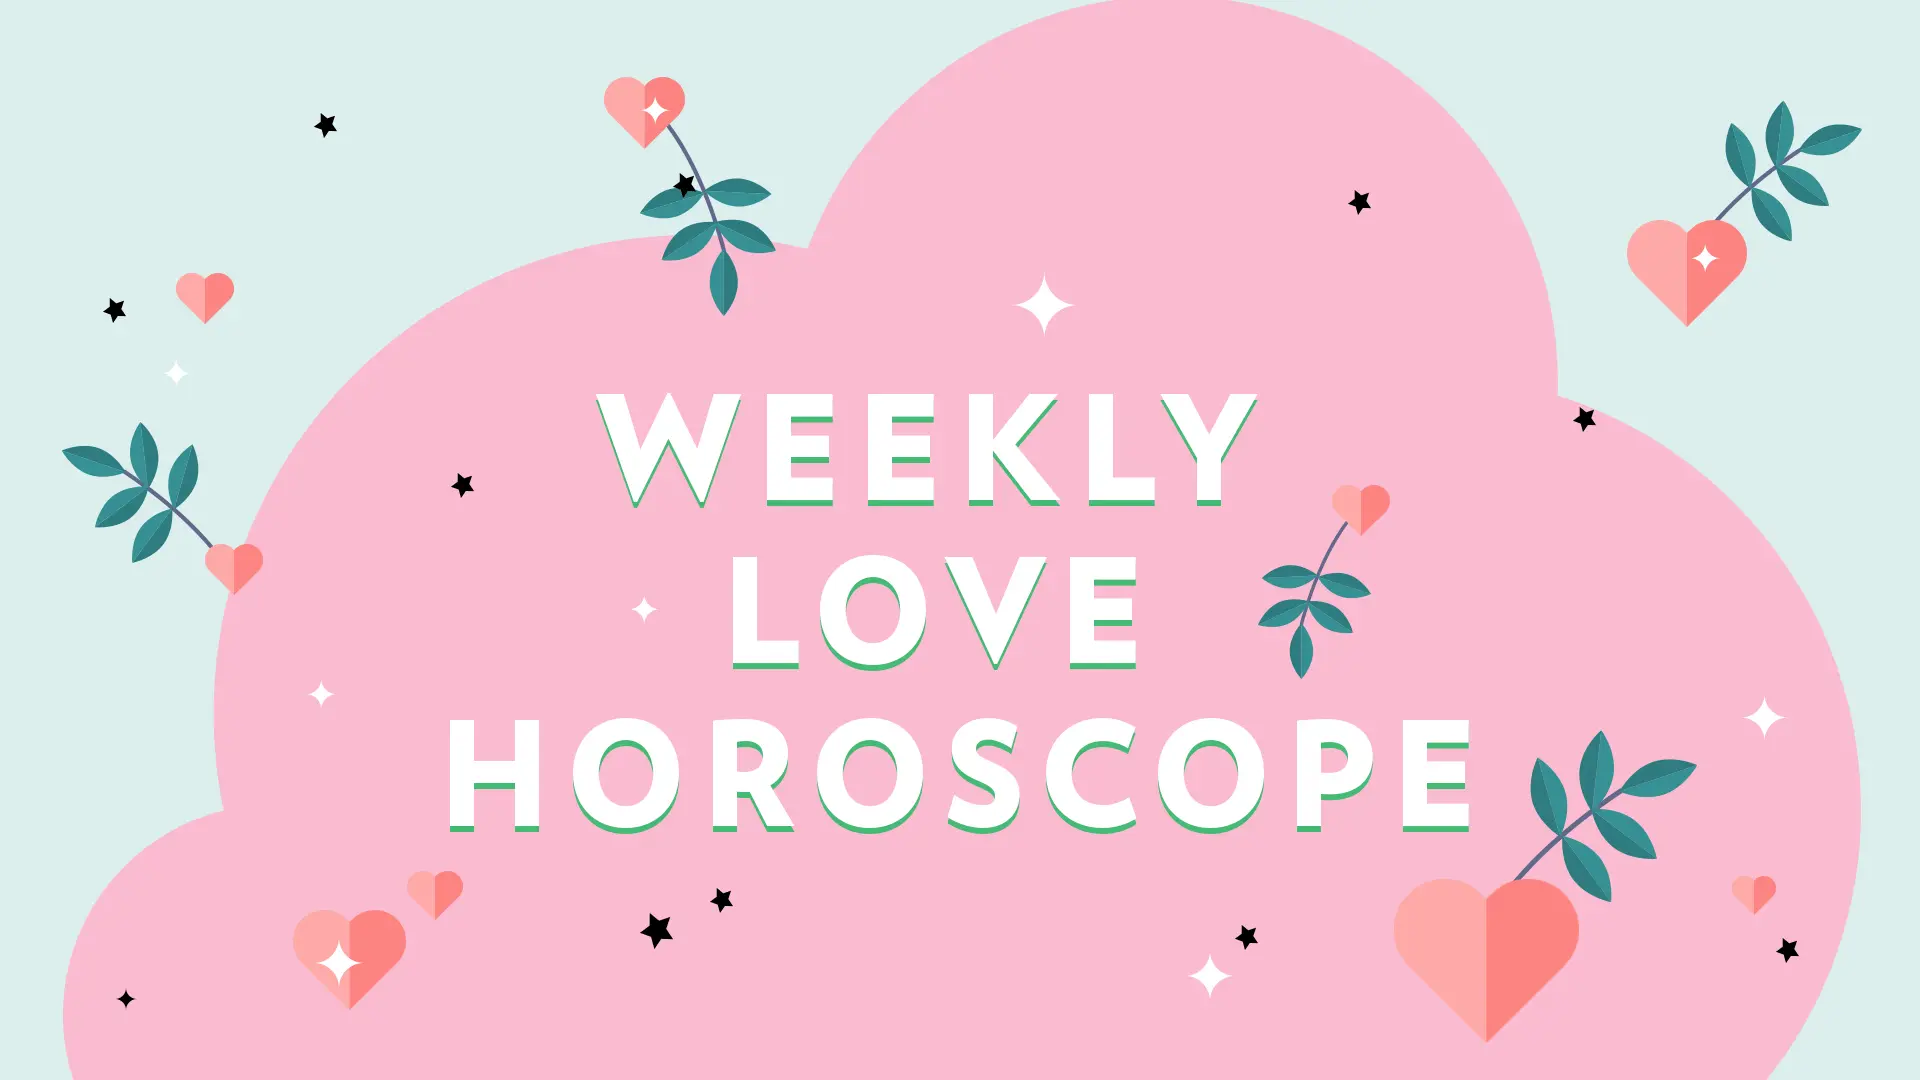 Weekly Love Horoscope: Love and Relationships